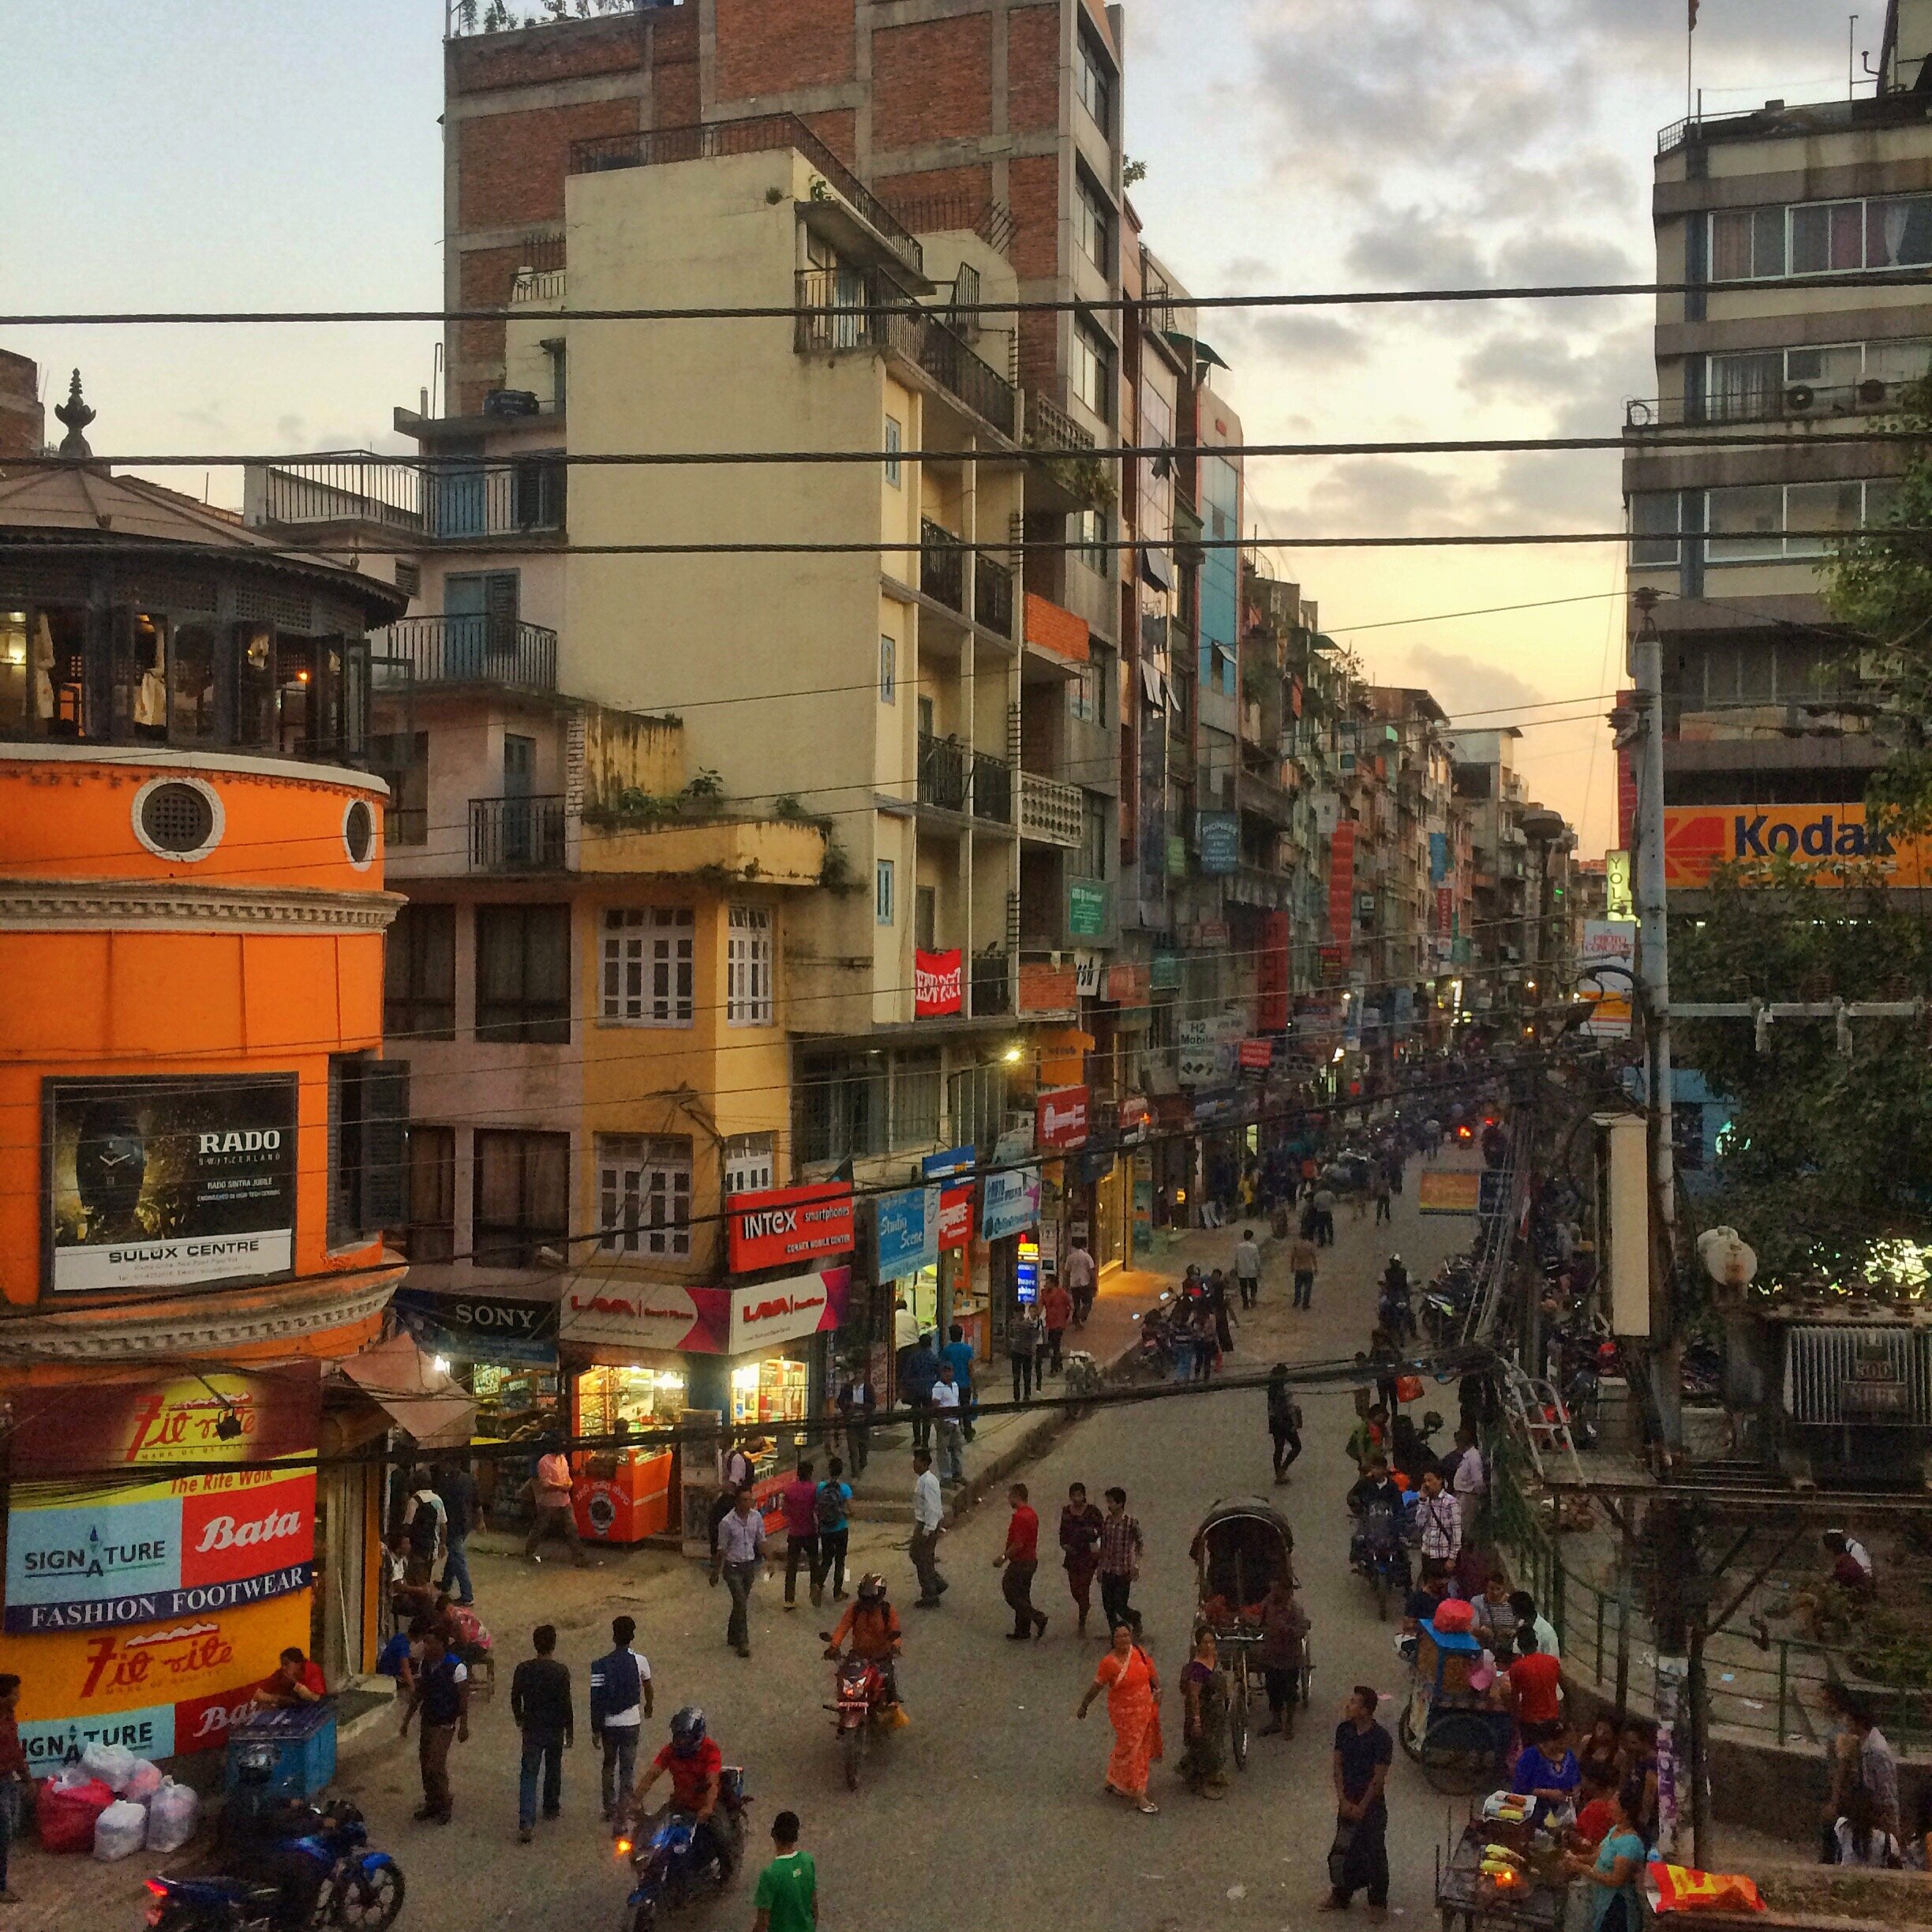  The busy streets of Kathmandu, Nepal.  I spent 6 weeks there with some Salt Lake friends doing some trekking and some climbing.  